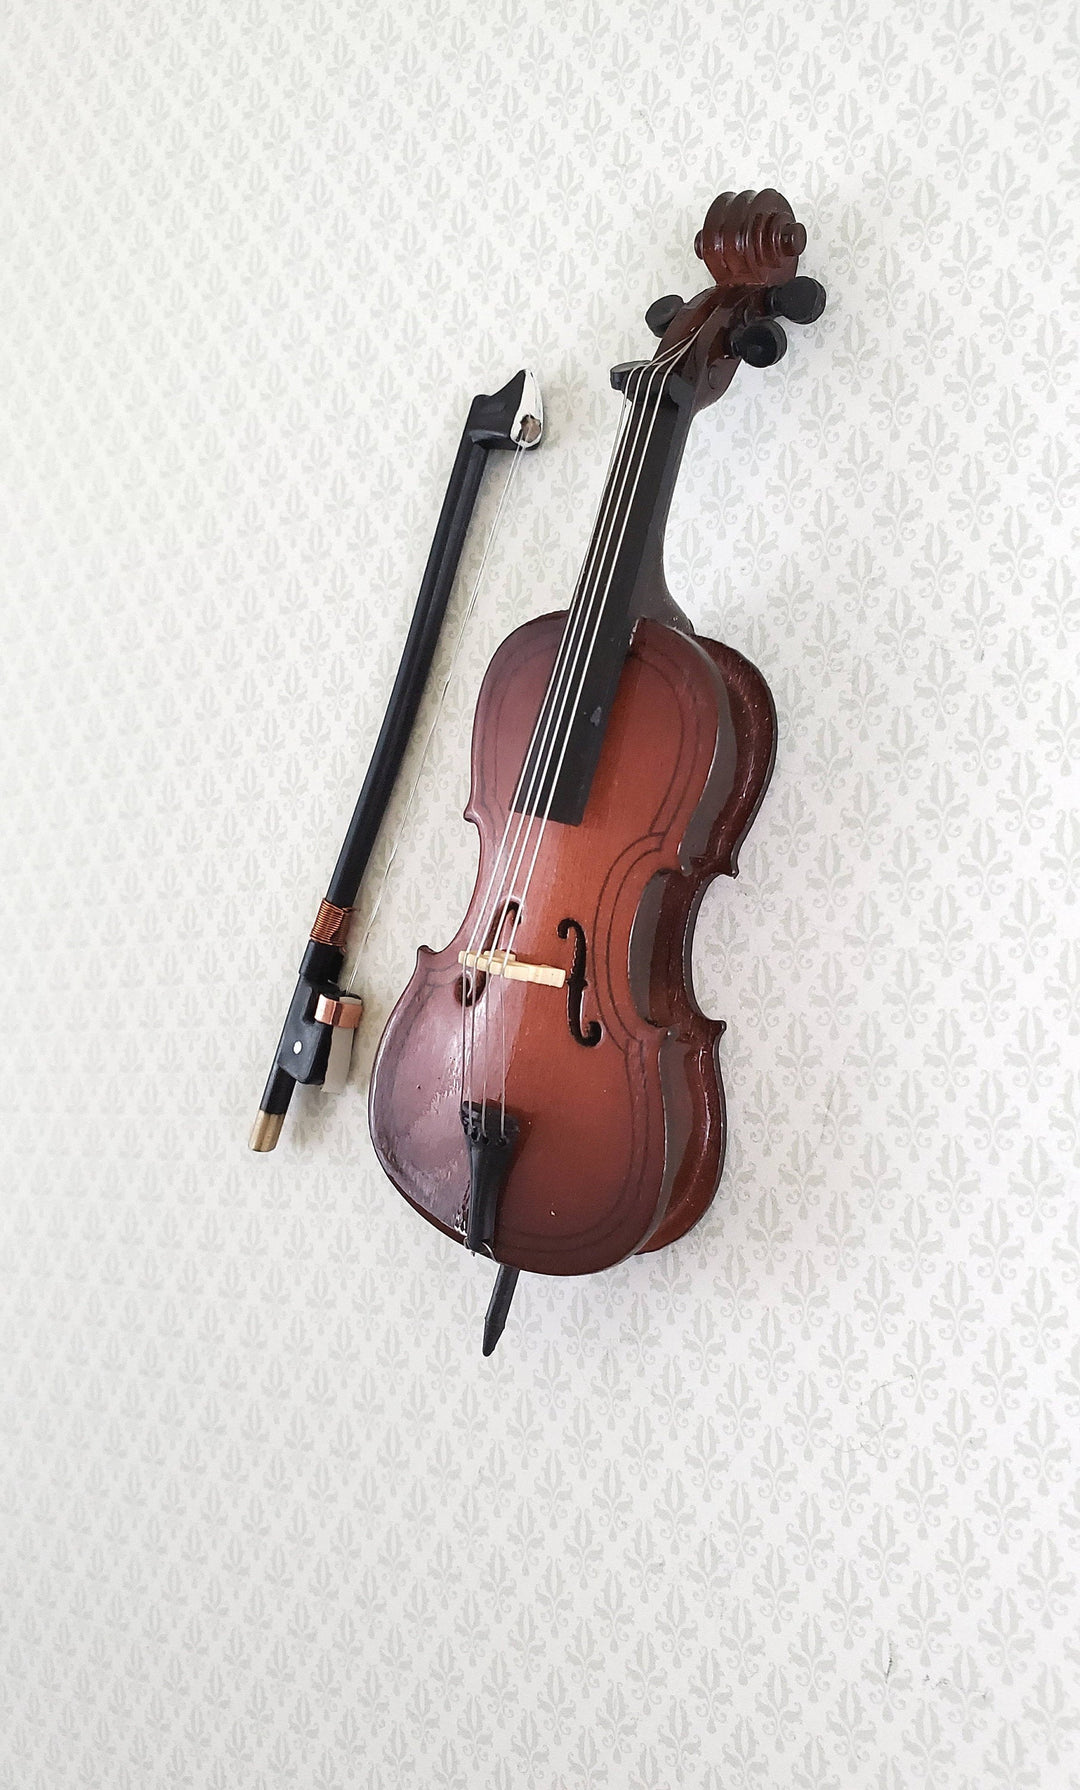 Dollhouse Miniature Cello and Bow Wood 4 1/2" 1:12 Scale Instrument